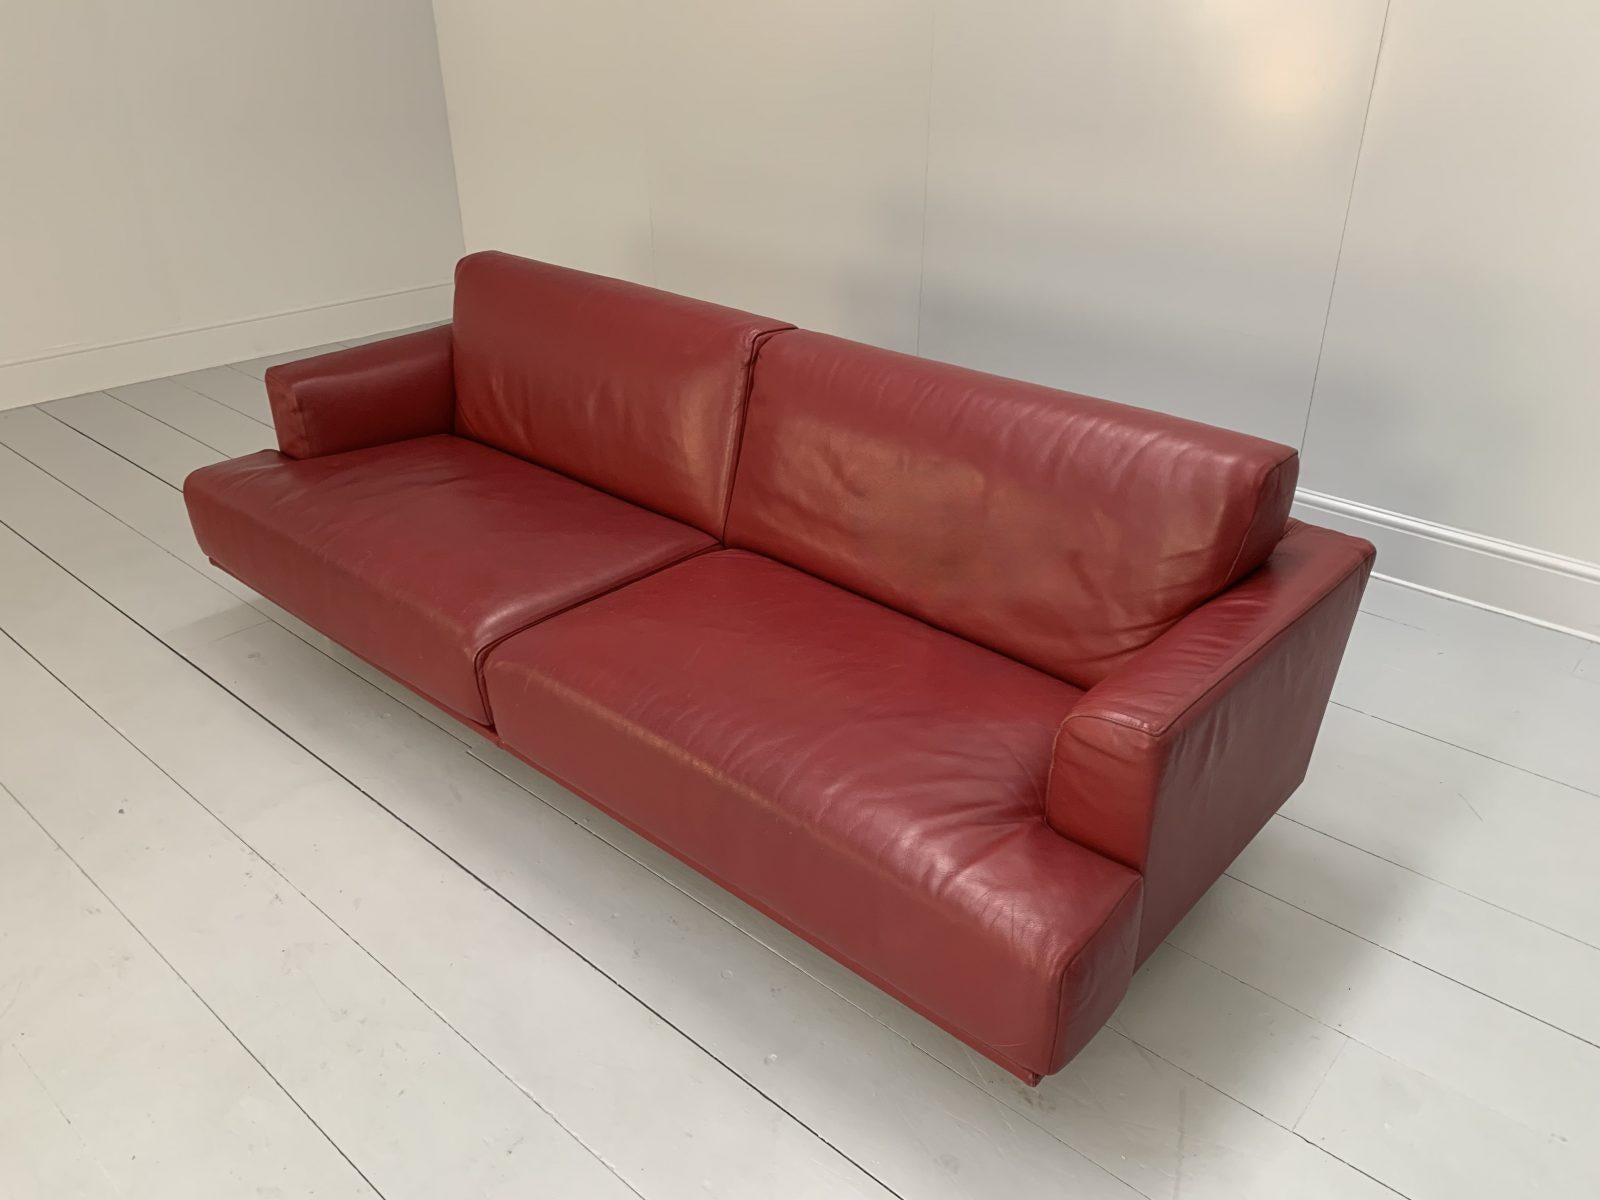 Cassina “253 Nest” 2.5-Seat Sofa & Bench Footstool – In Red “Pelle” Leather 5